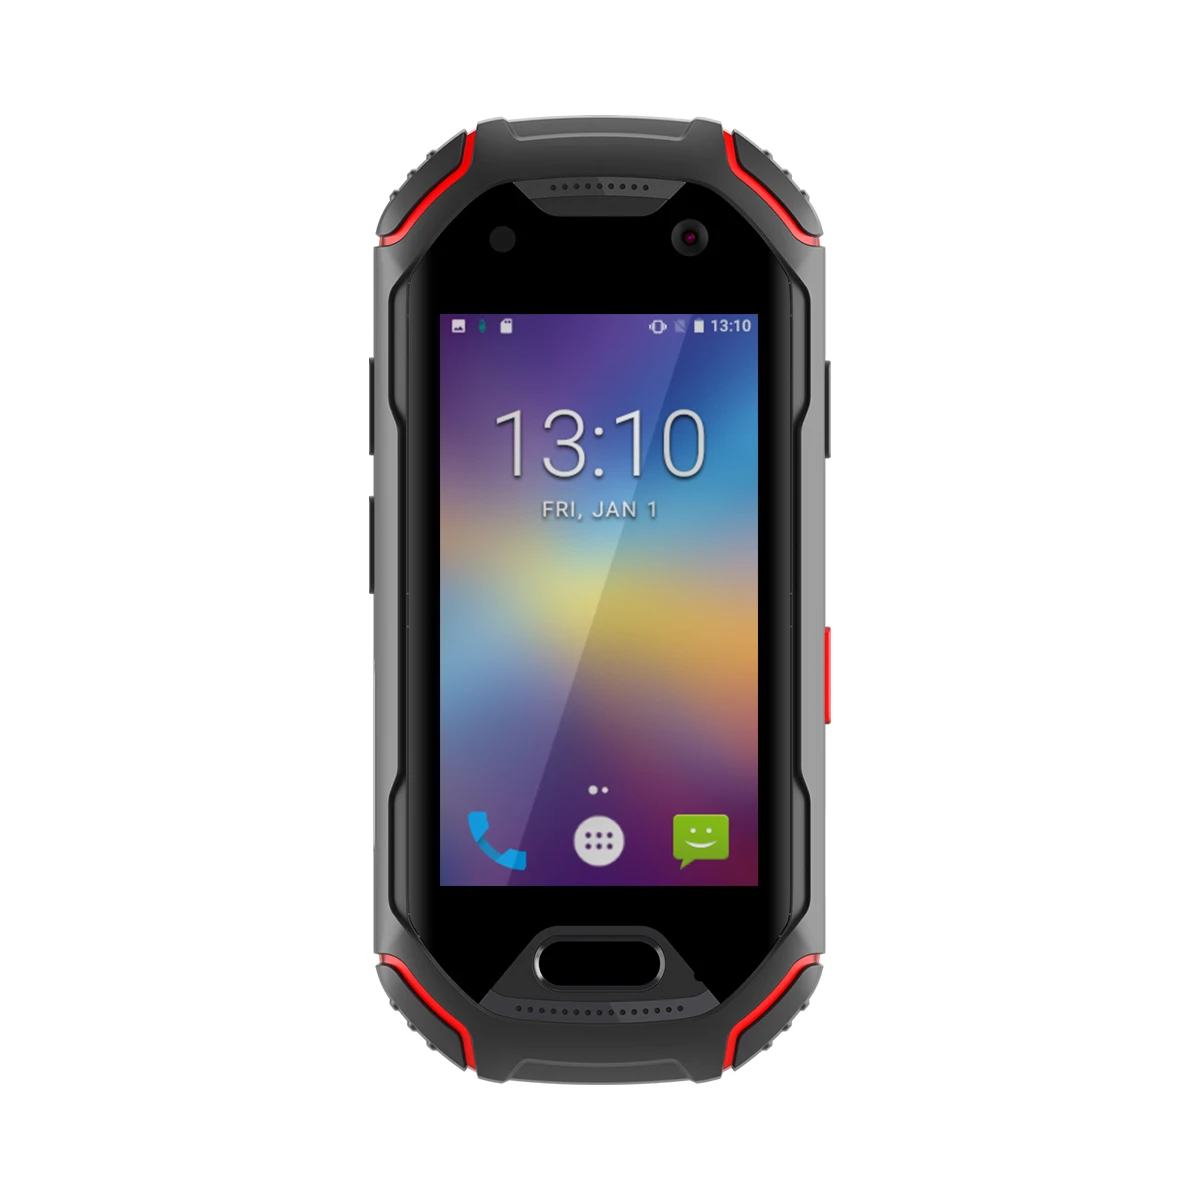 

Super Small 4G Rugged android phone unihertz Atom NFC Unlocked Smart Phone with 4GB RAM and 64GB ROM